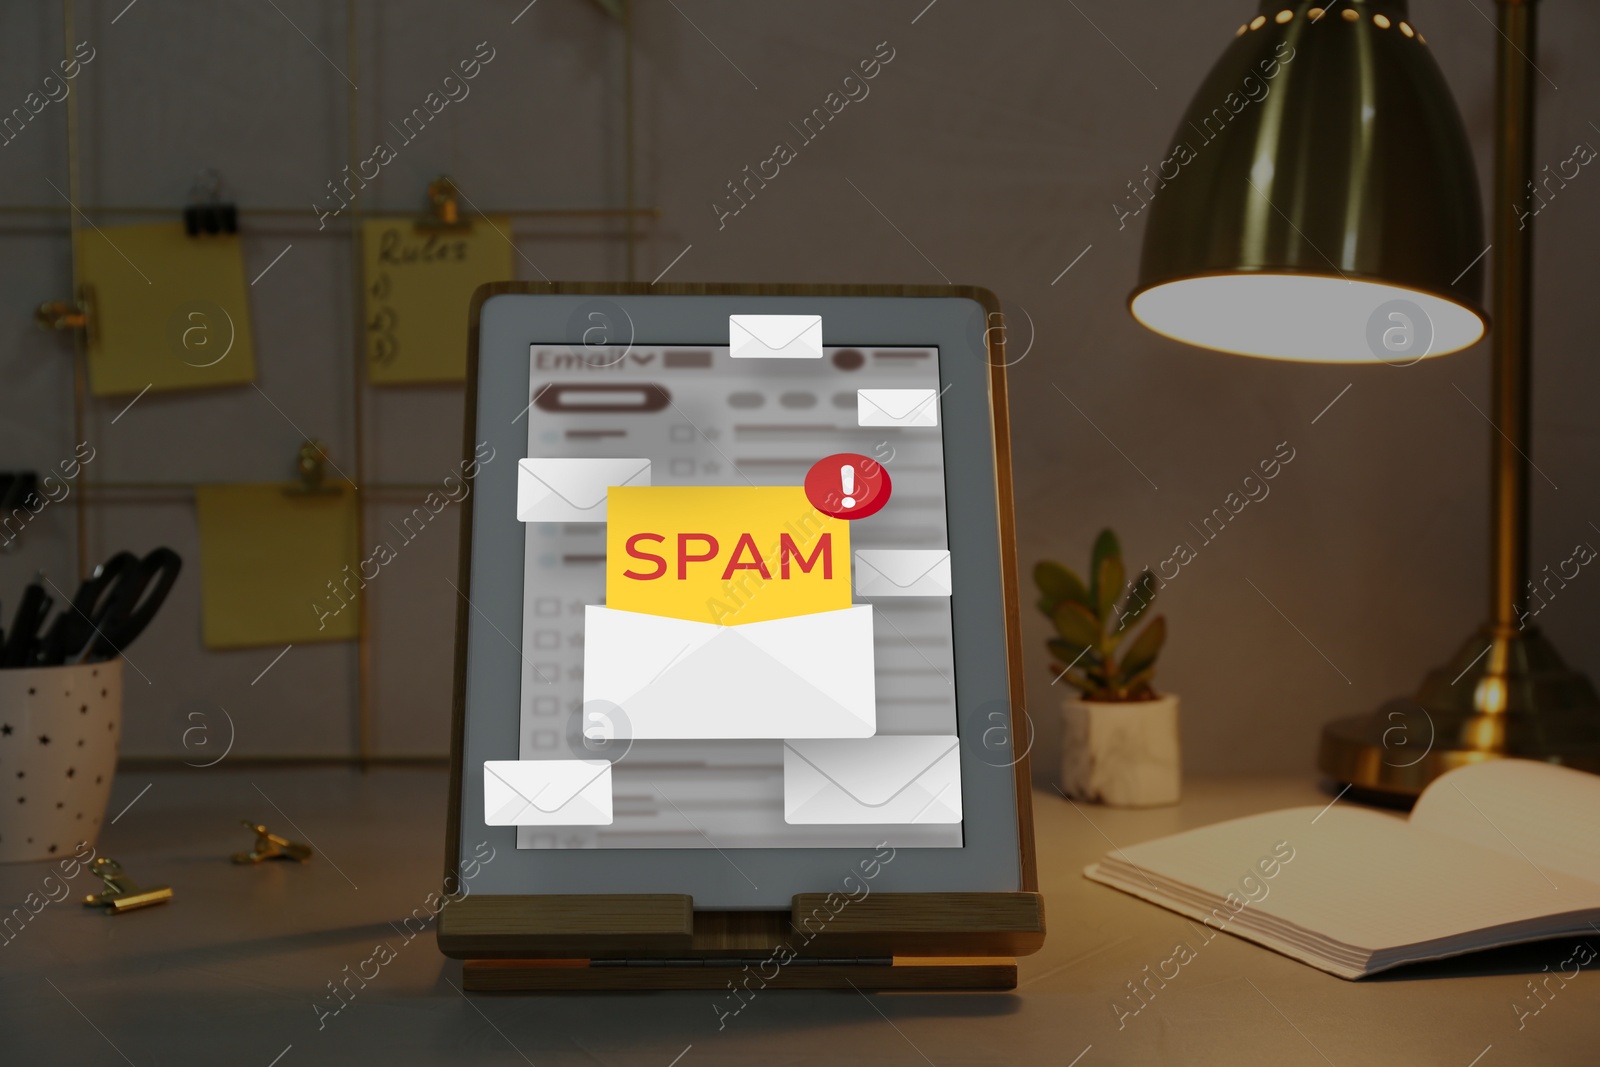 Image of Spam warning message in email software. Envelope illustrations popping out of tablet display on office desk